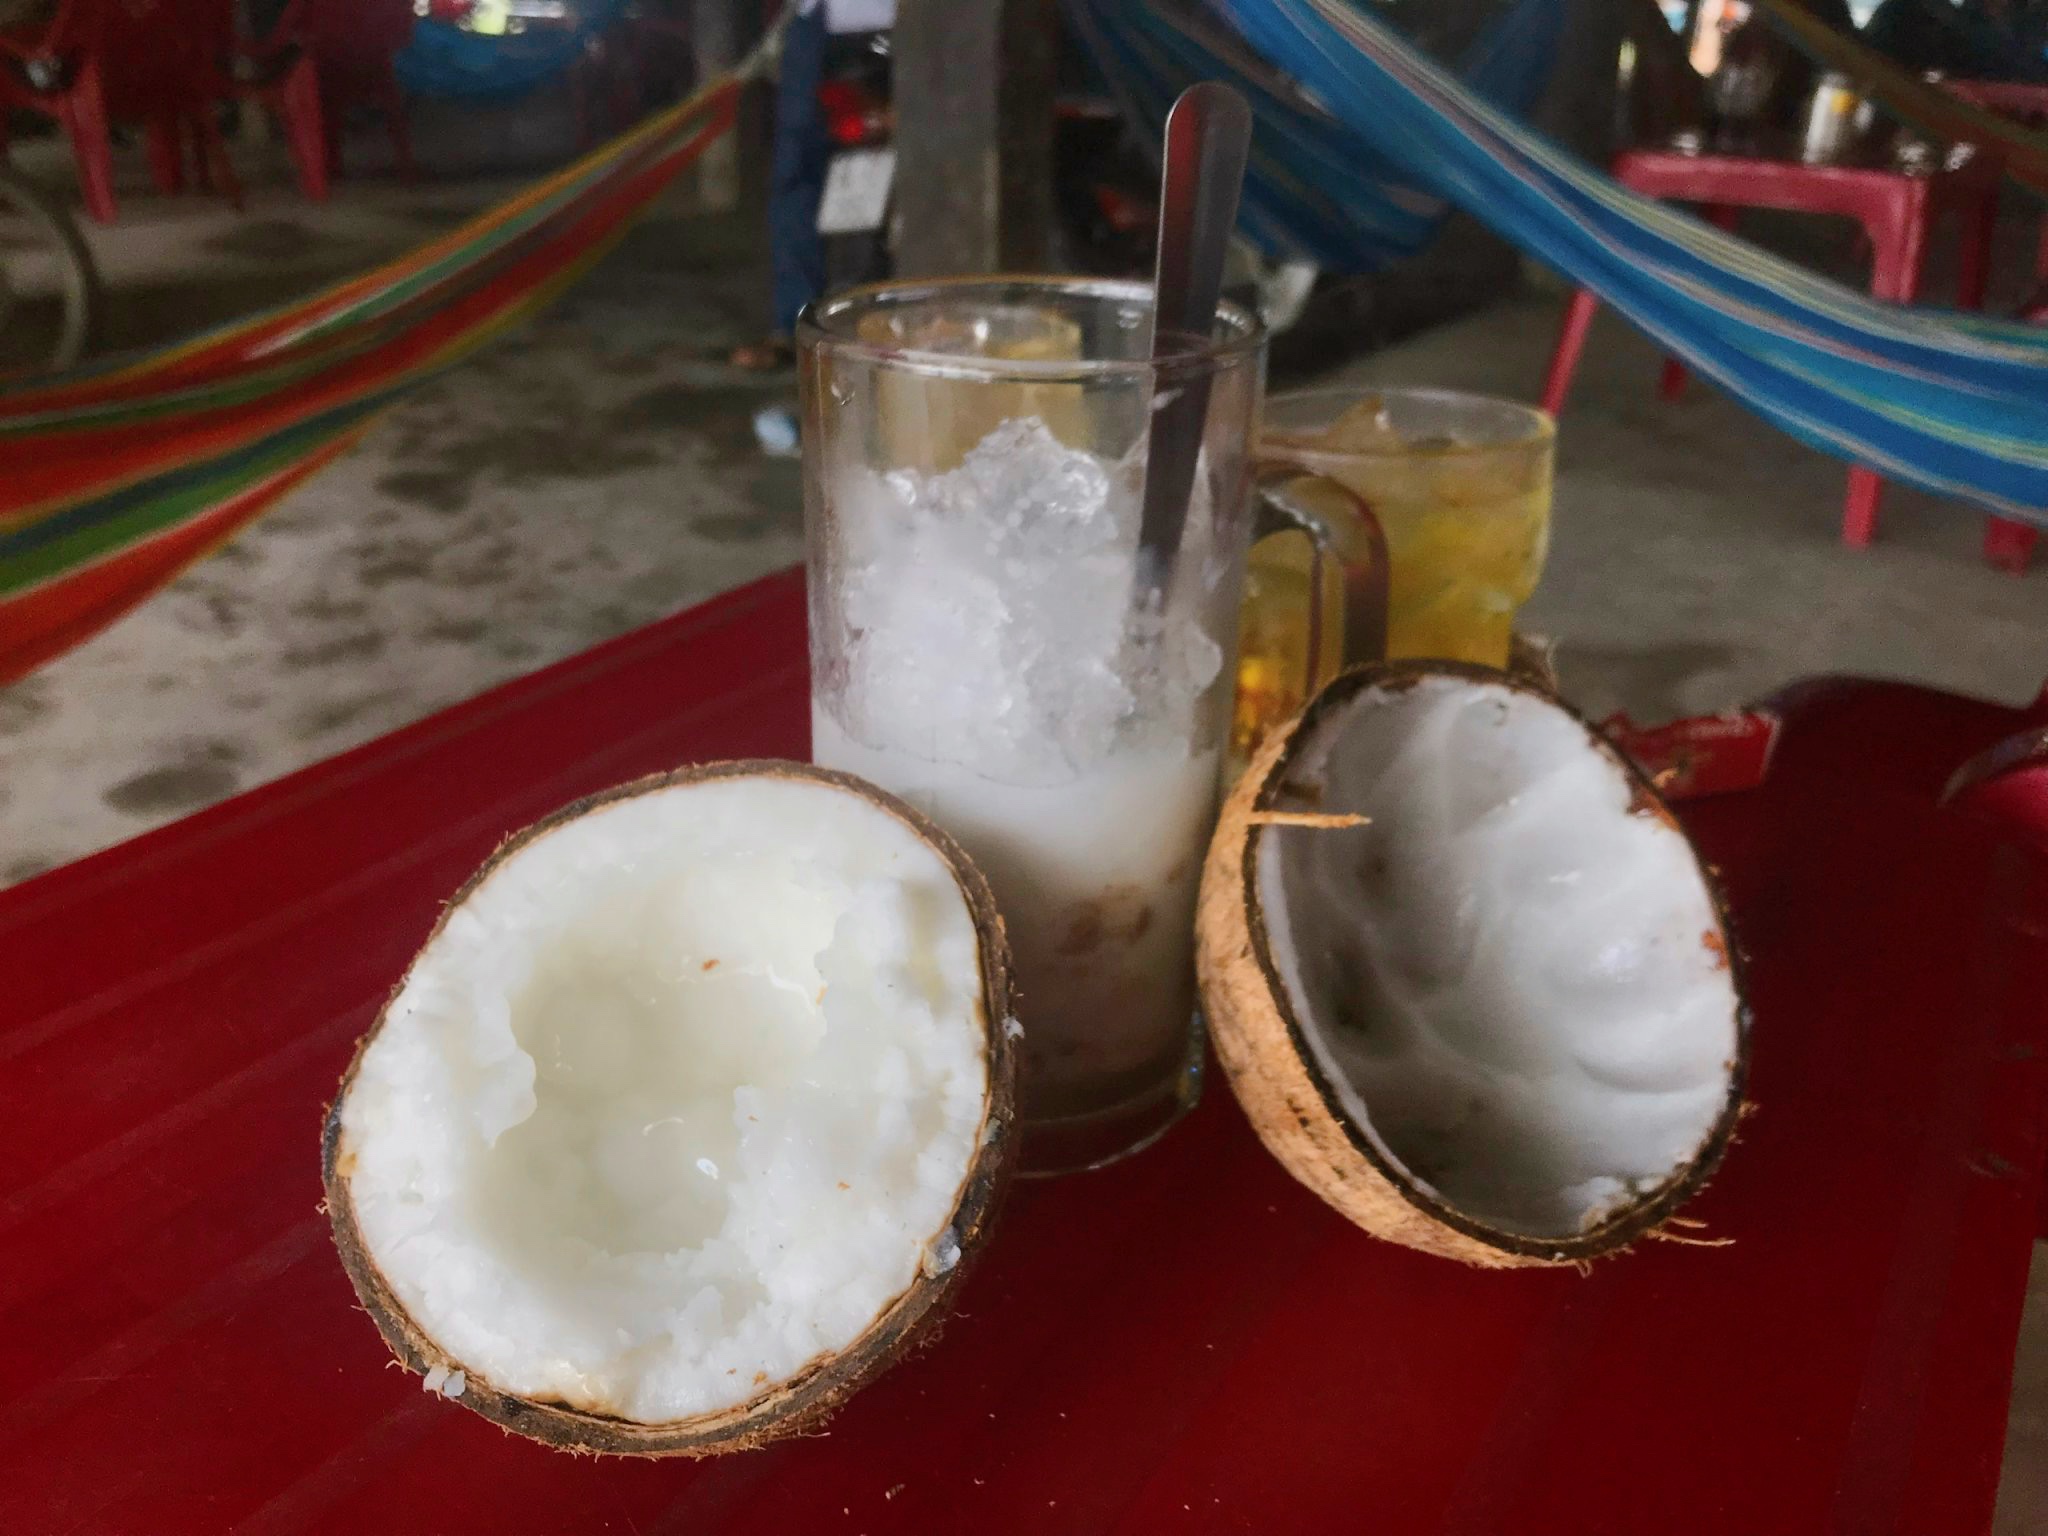 Vietnamese often mix 'dừa sáp' with sweet condensed milk, shaved ice and peanuts to make a dessert. Photo: Son Lam / Tuoi Tre